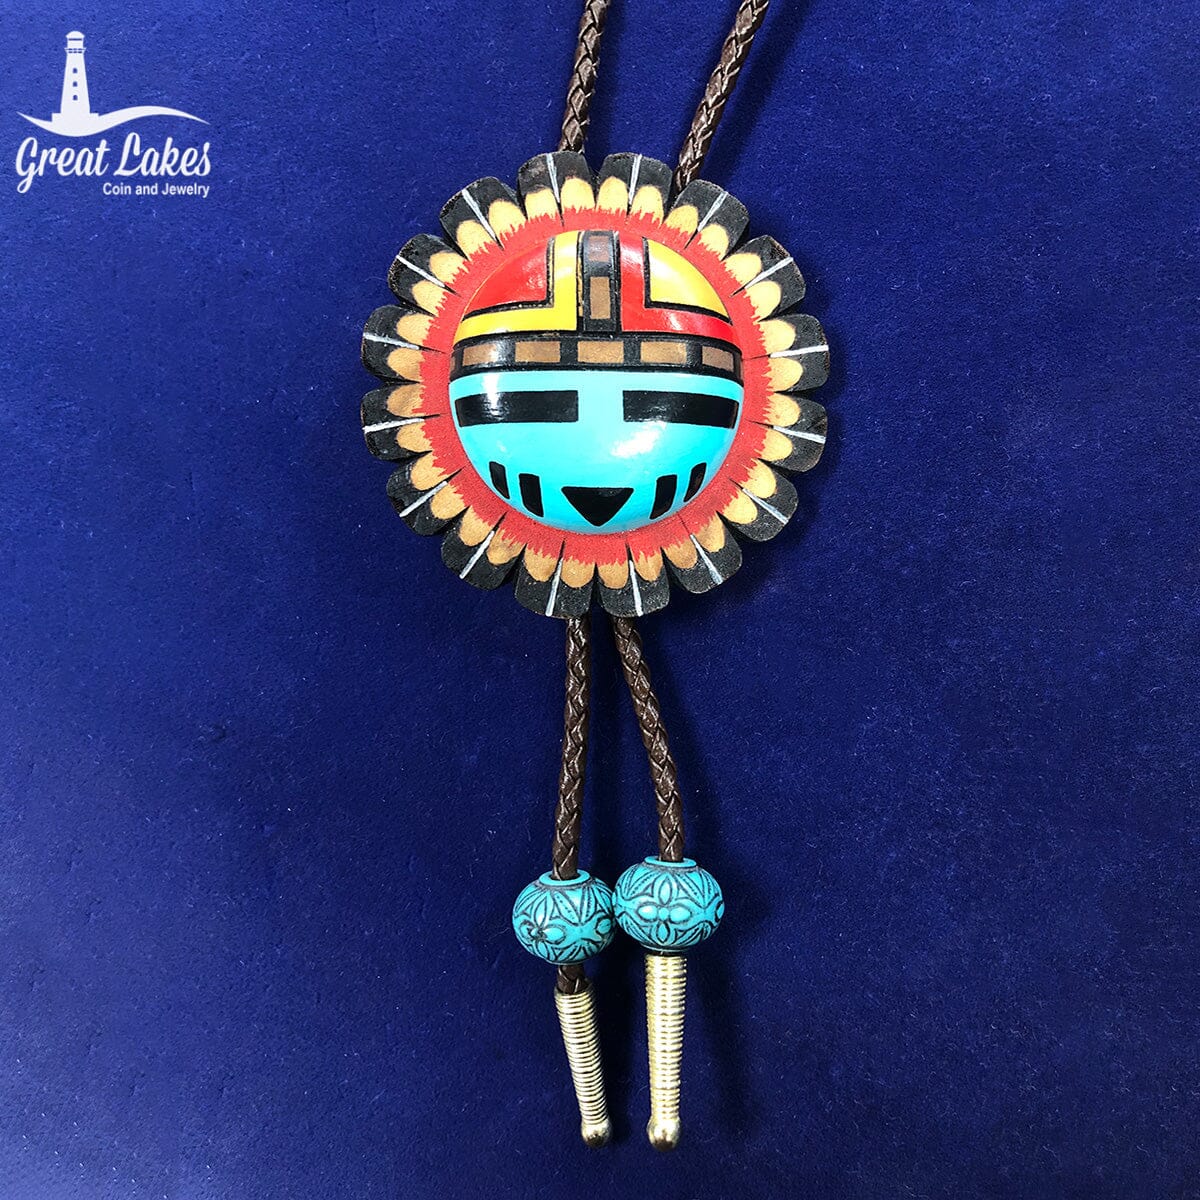 Great Lakes Coin Native American Handmade Painted Wooden Bolo Tie